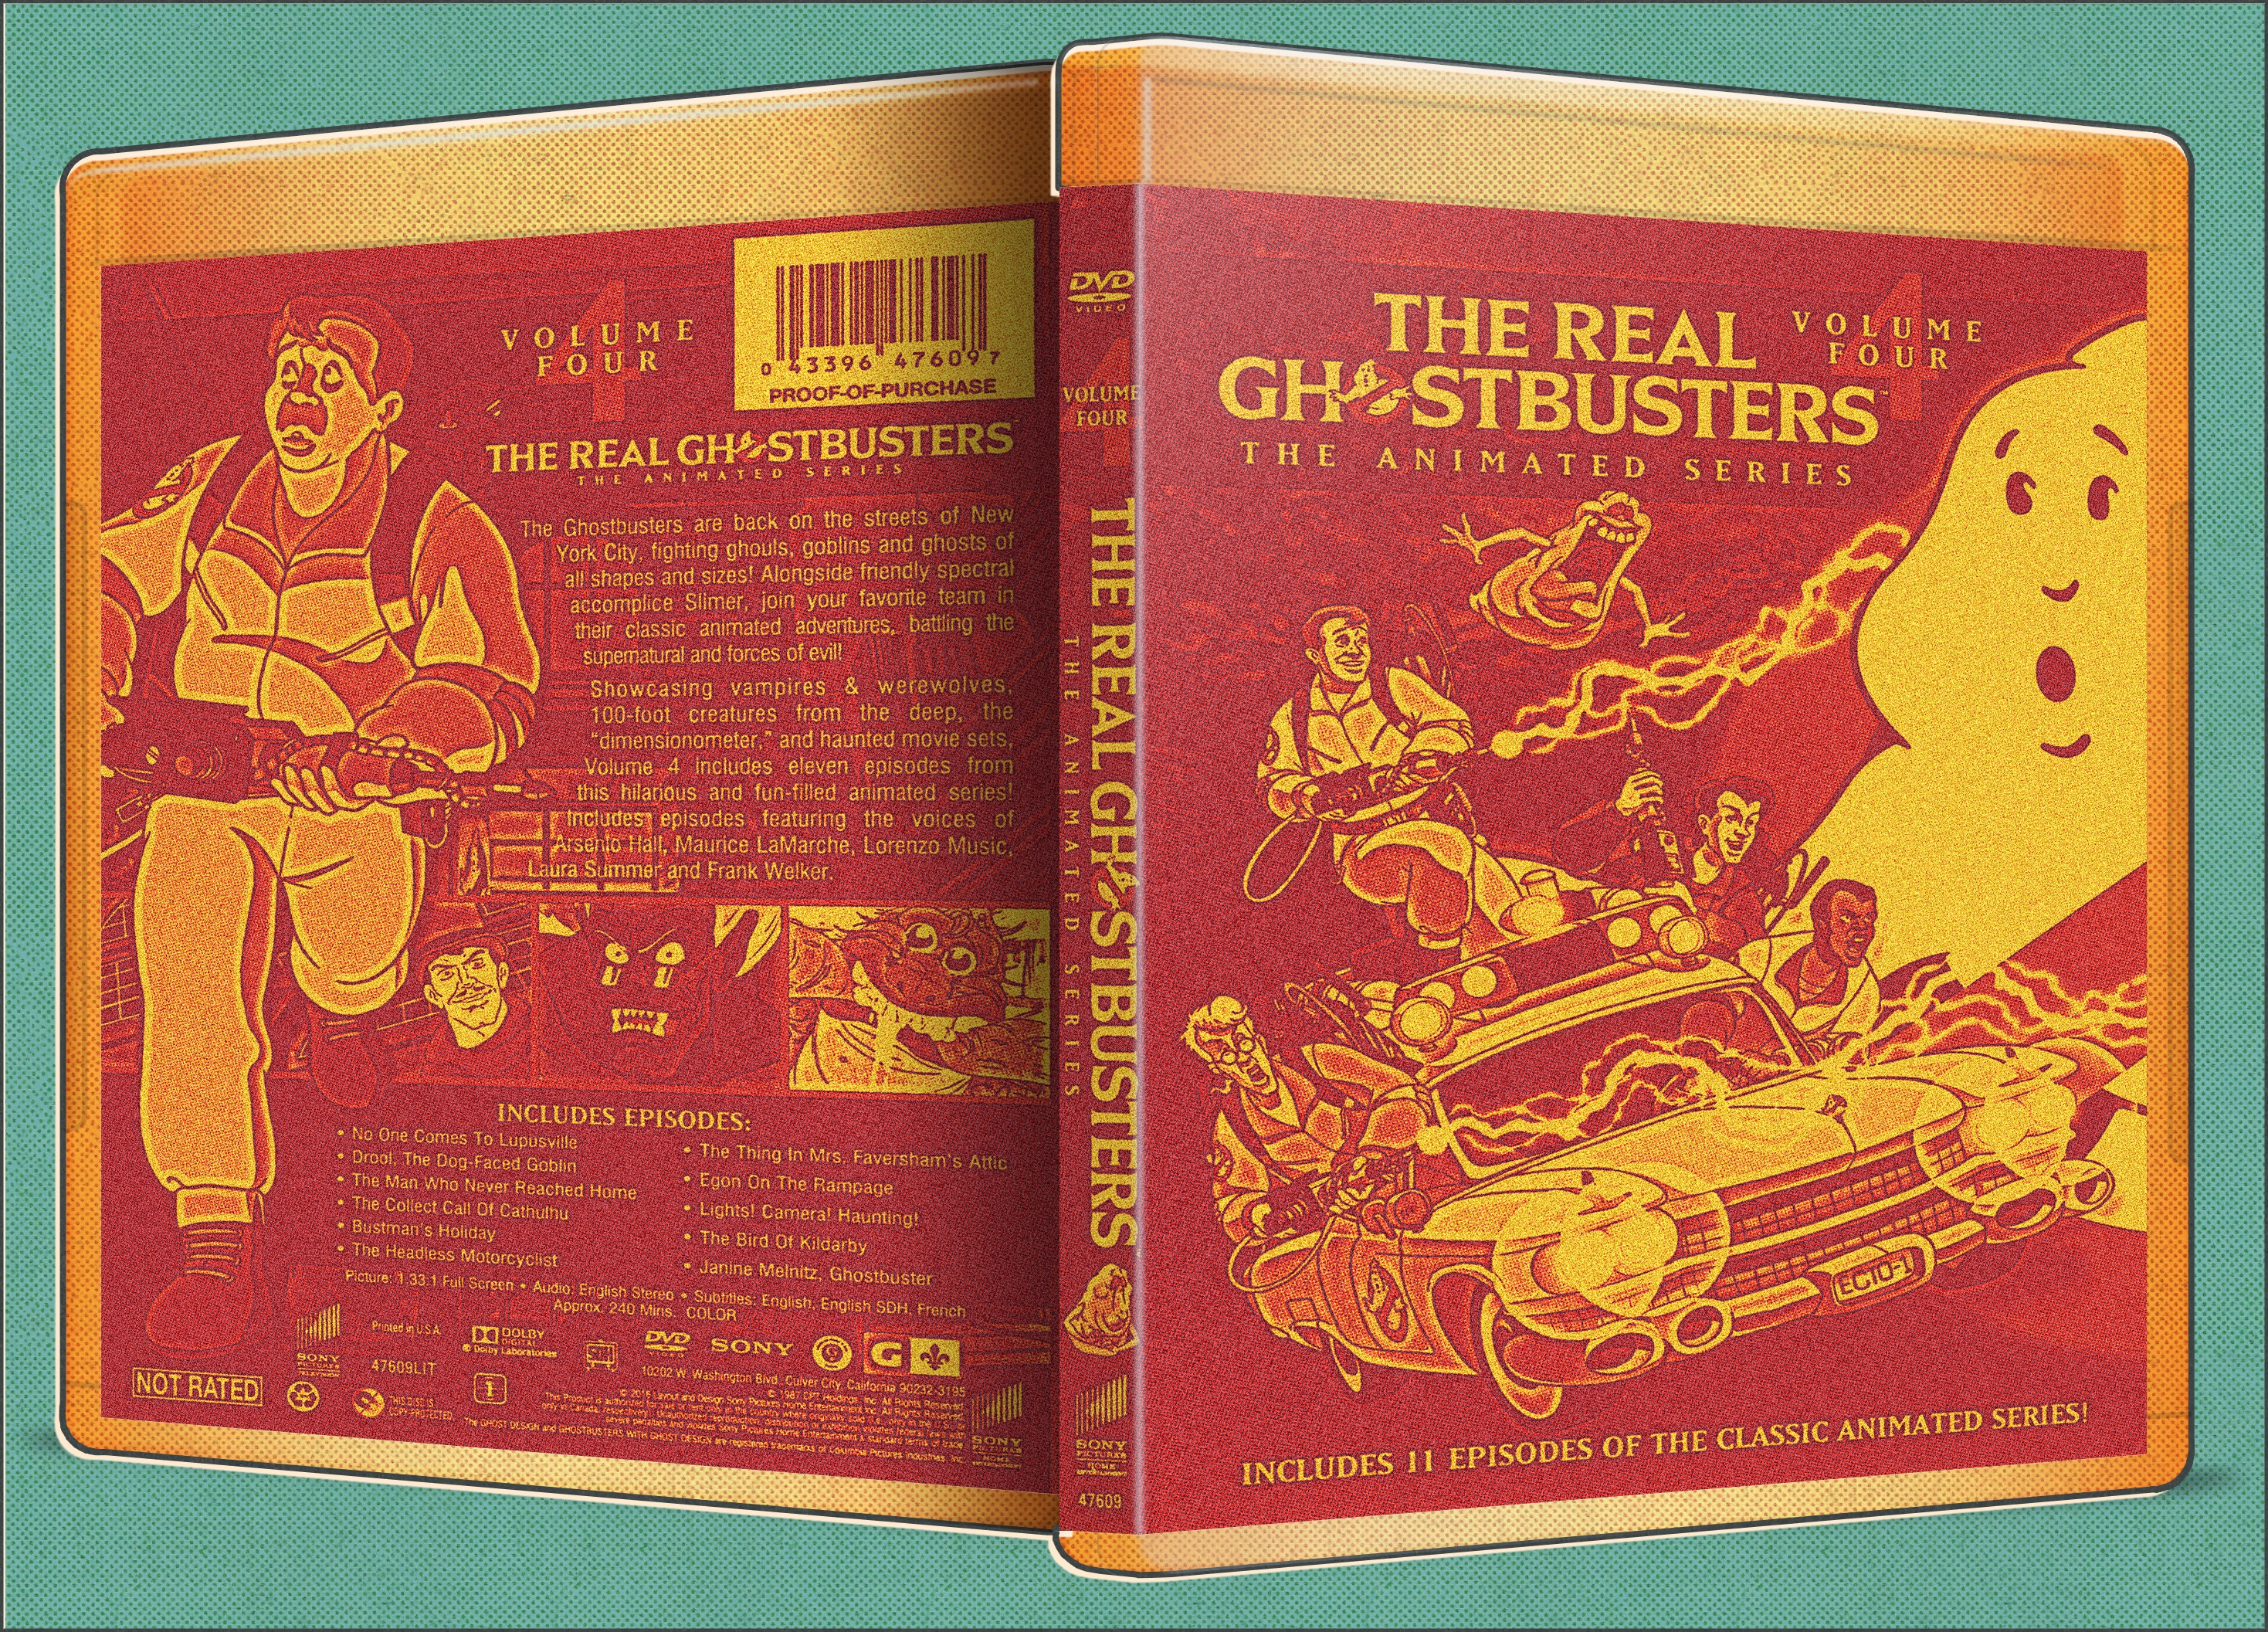 The Real Ghostbusters box cover